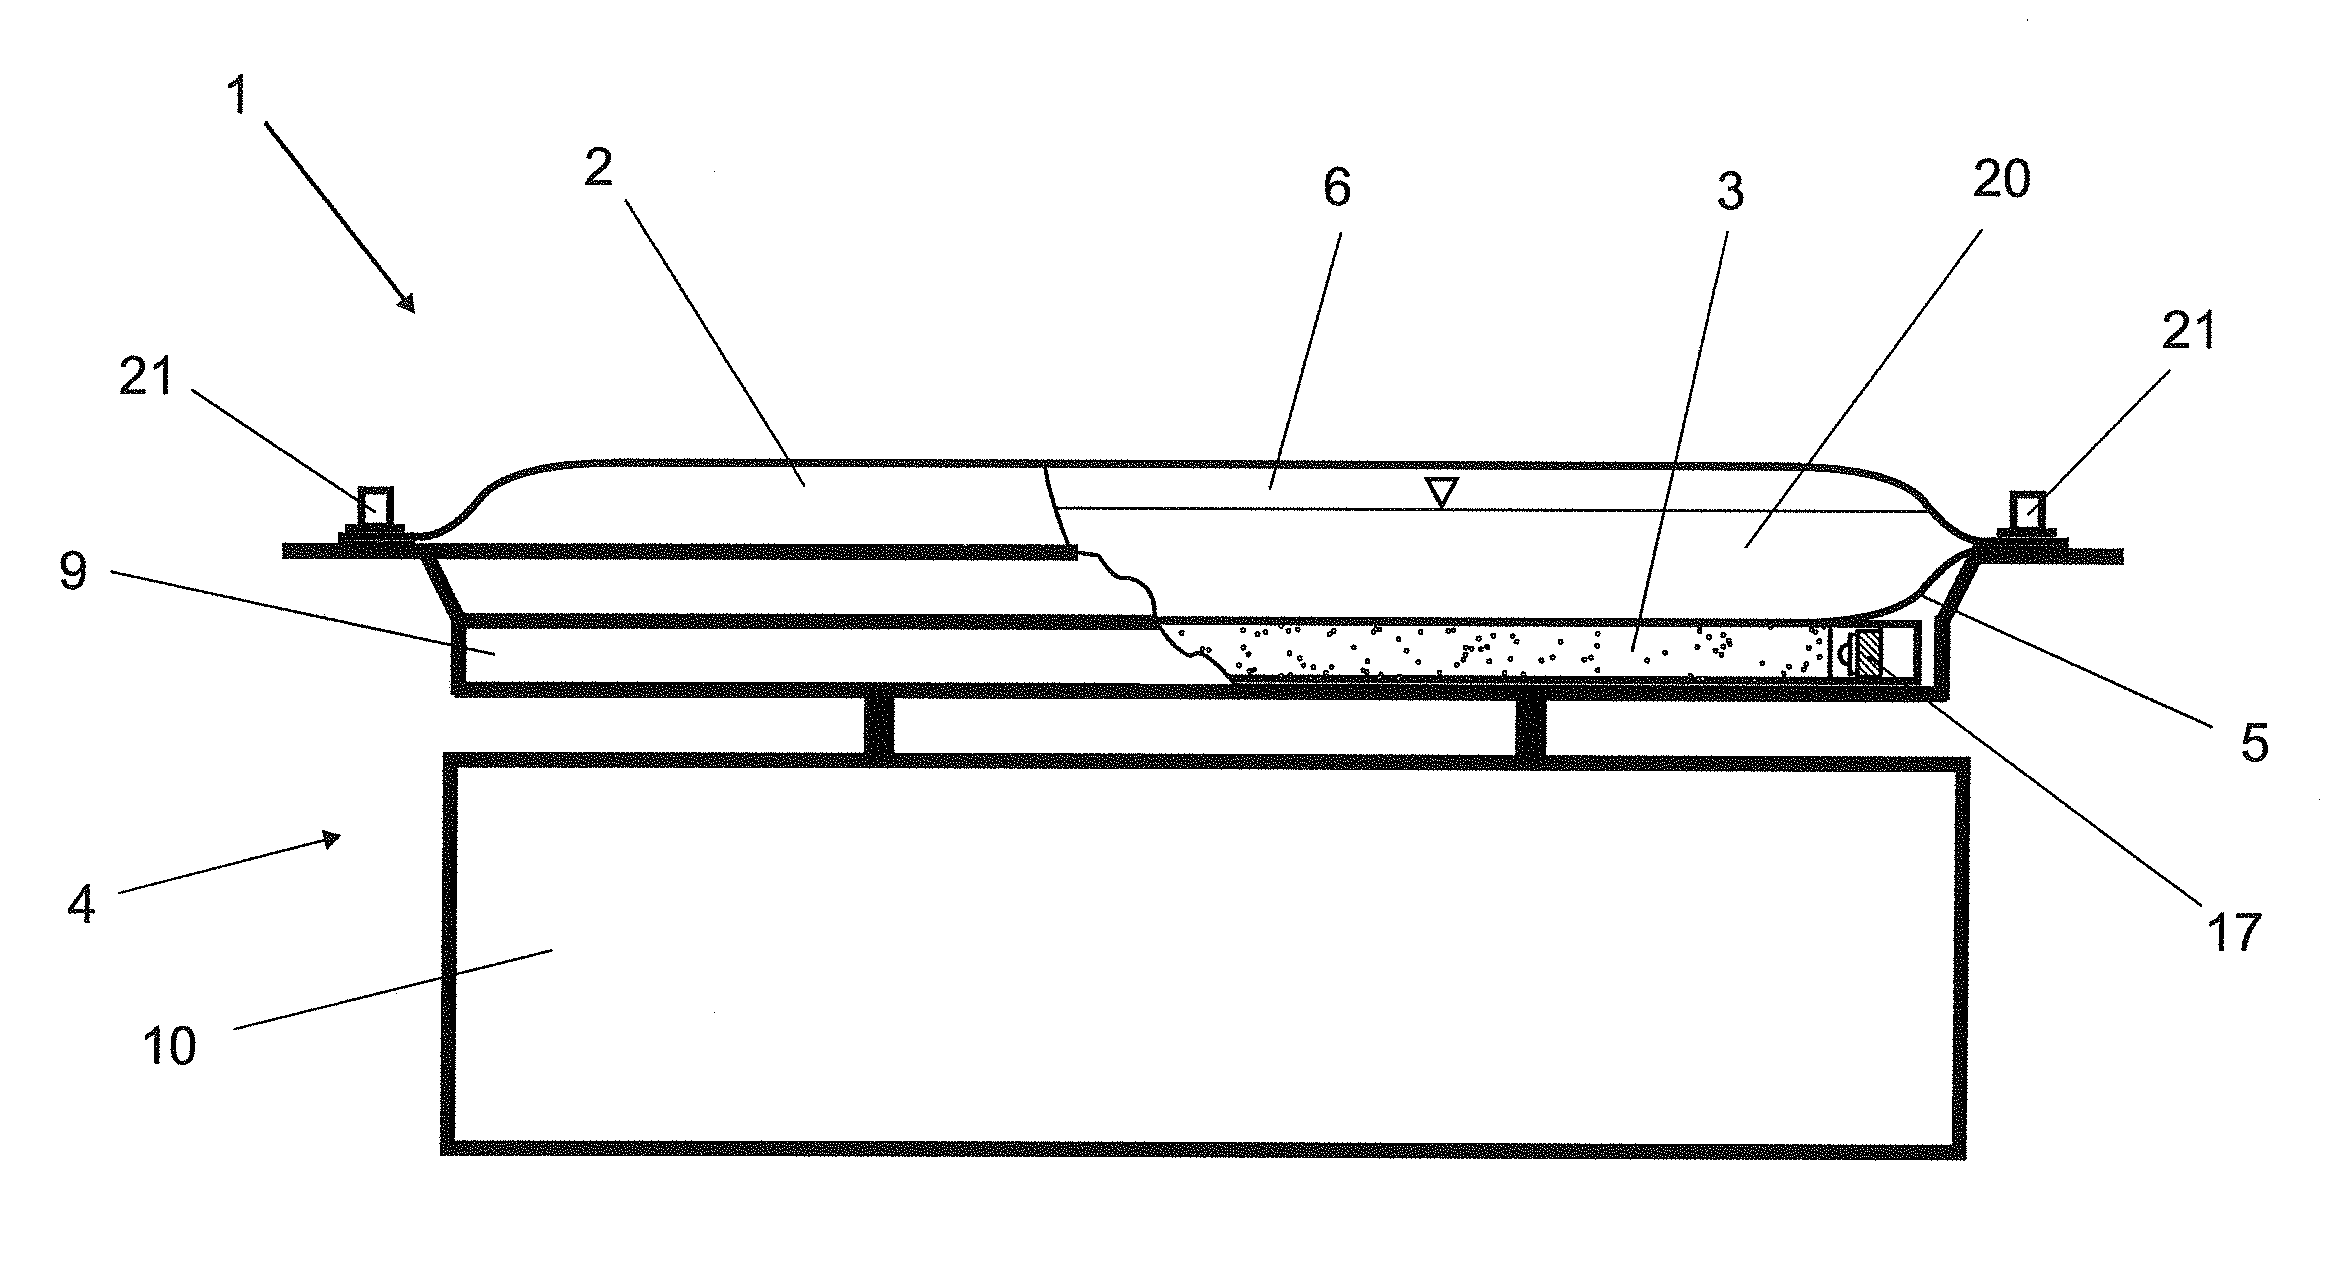 Bioreactor arrangement, shaking device and method for irradiating a medium in a bioreactor